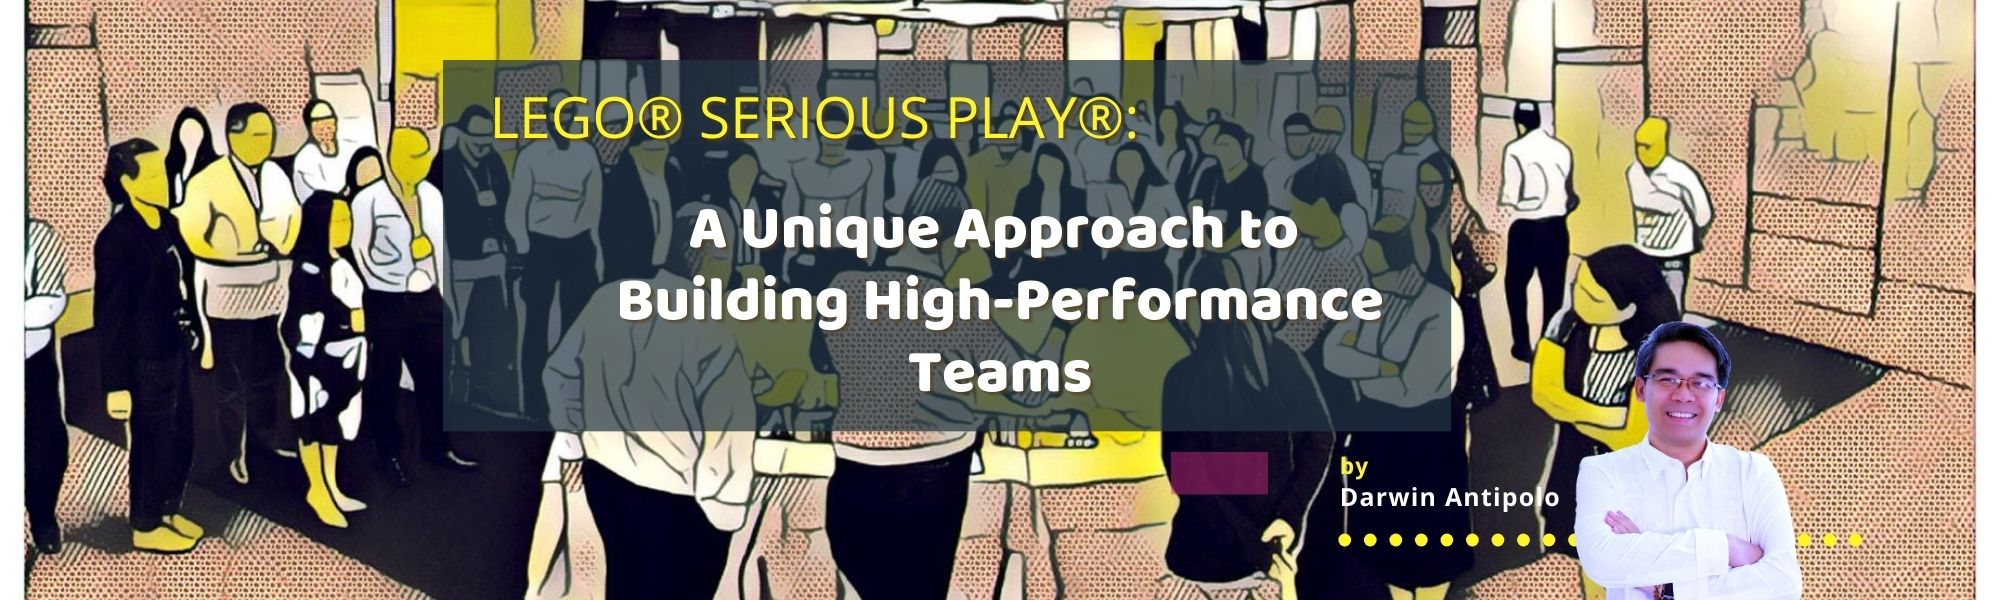 Article Lego Serious Play Teambuilding High Performance Teams